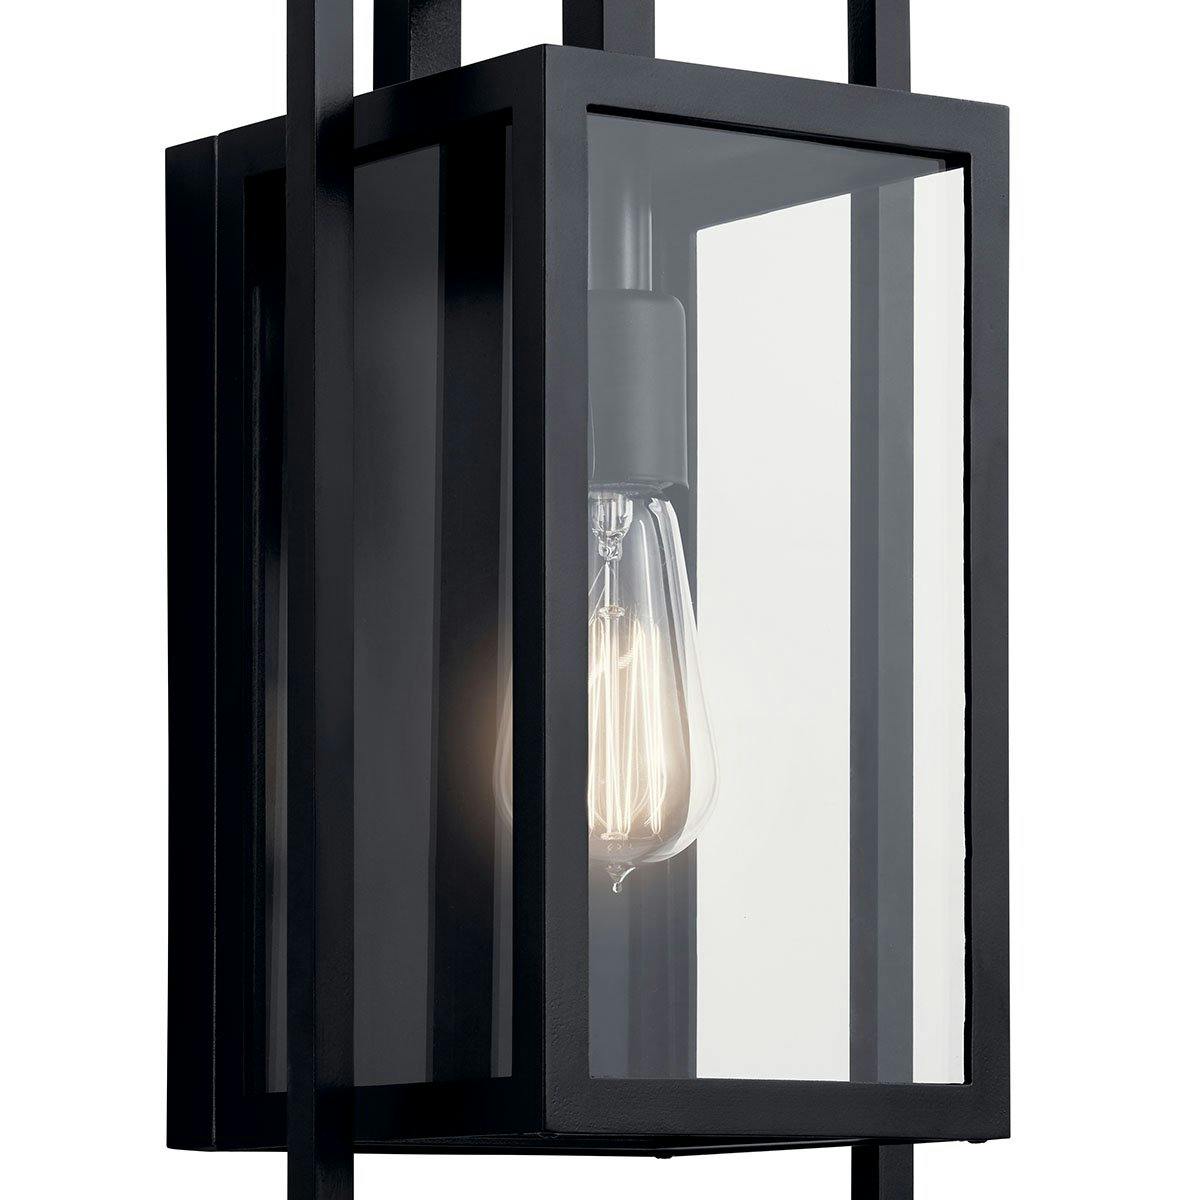 Close up view of the Goson™ 16" 1 Light Wall Light Black on a white background